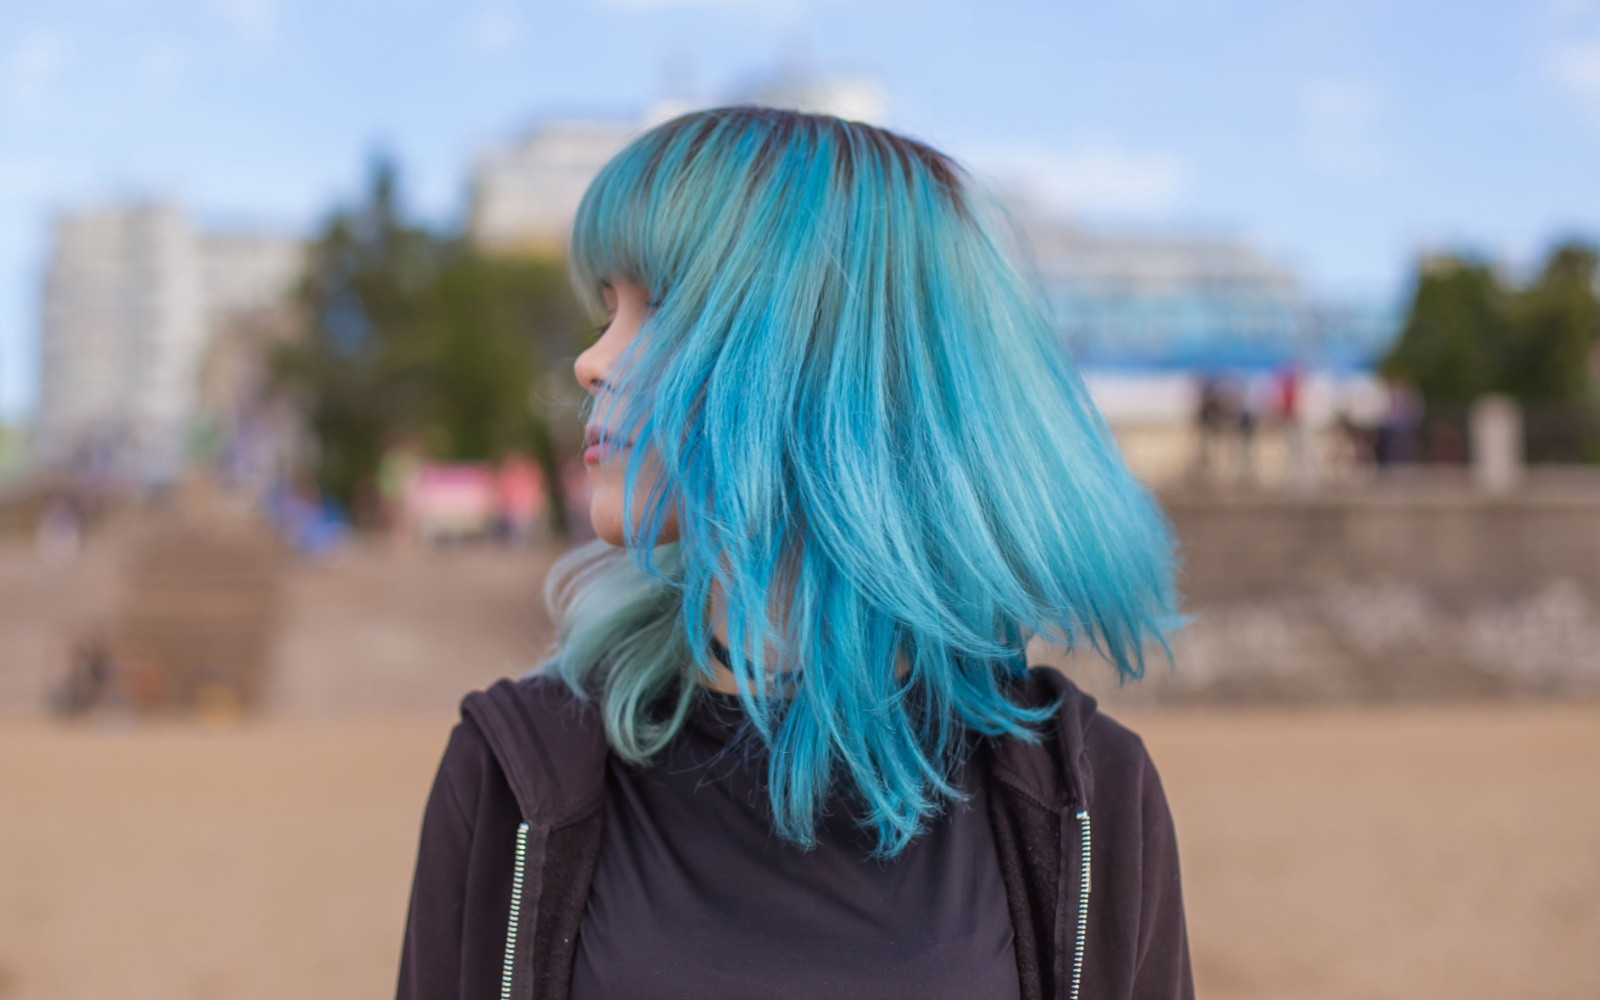 1. "Pastel Blue Hair Dye: 10 Best Brands for a Vibrant Look" - wide 3